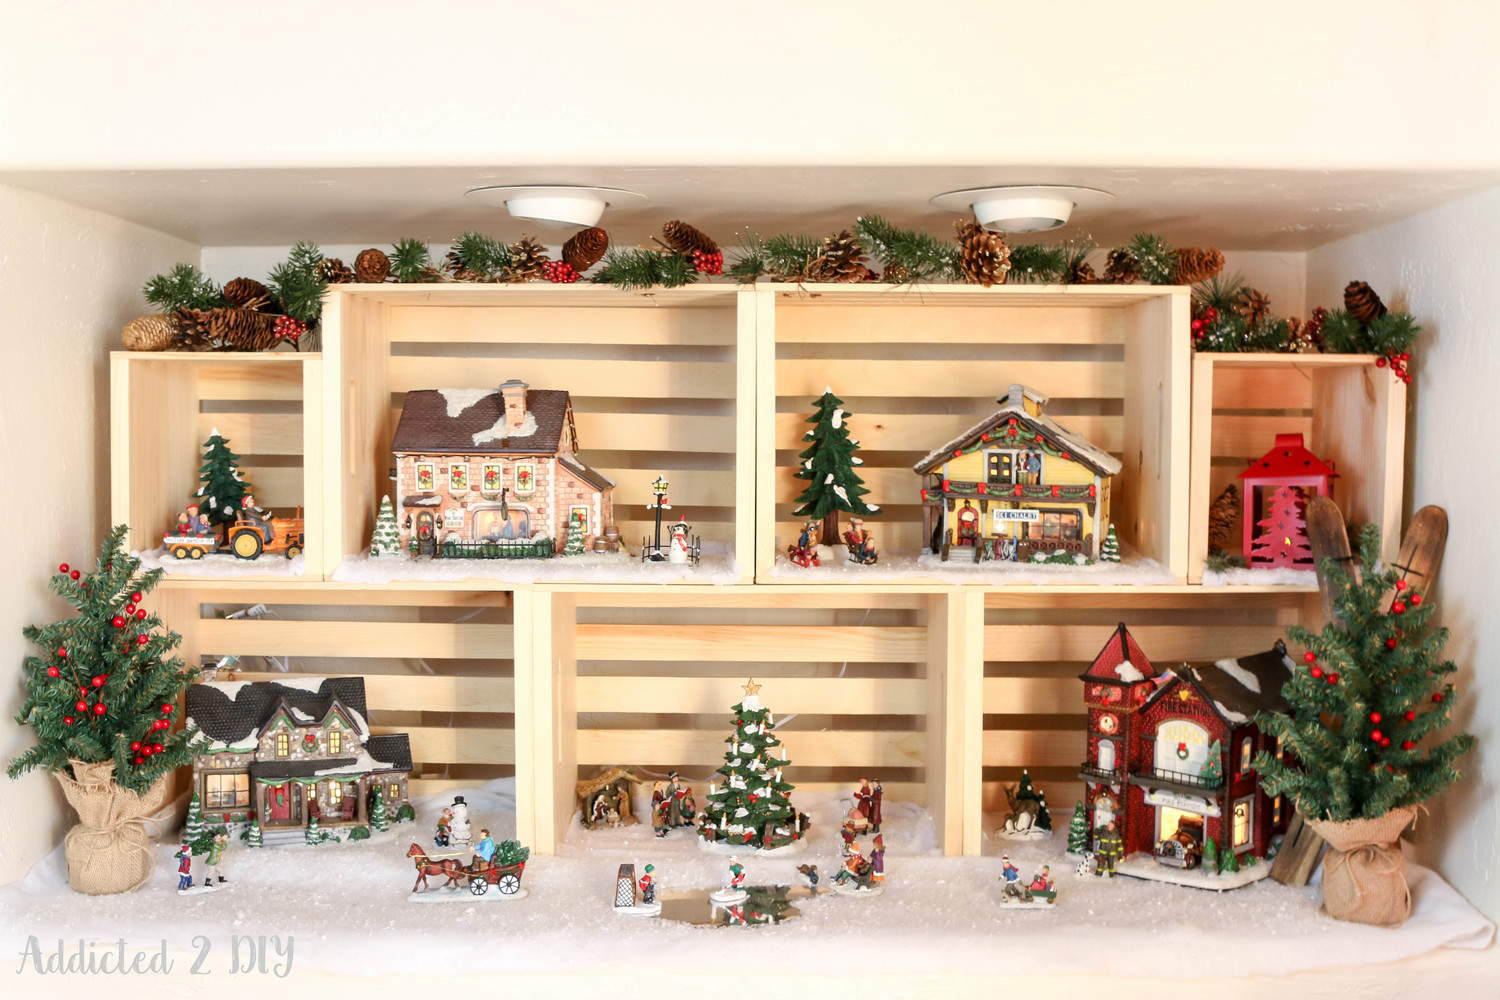 Christmas Village Display by Addicted 2 DIY — Crates and Pallet